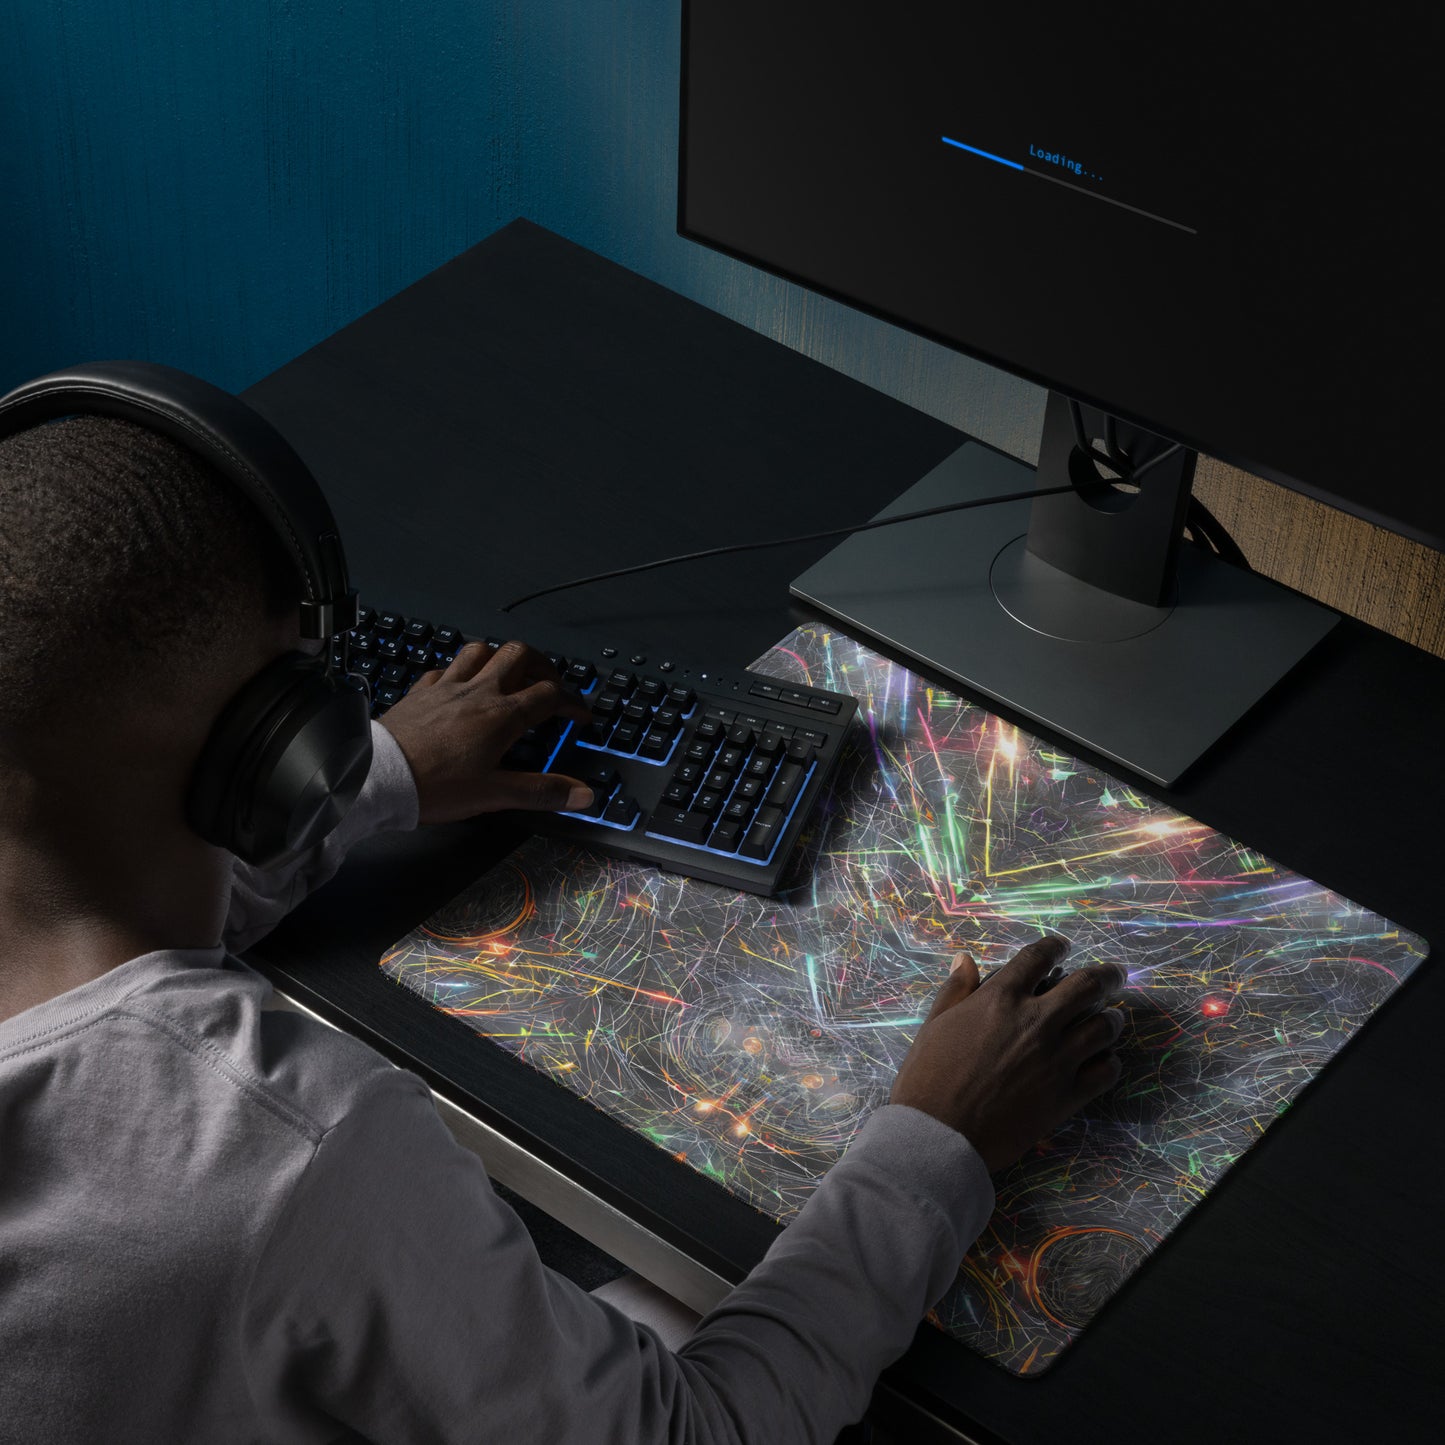 Totally Wired : Gaming mouse pad